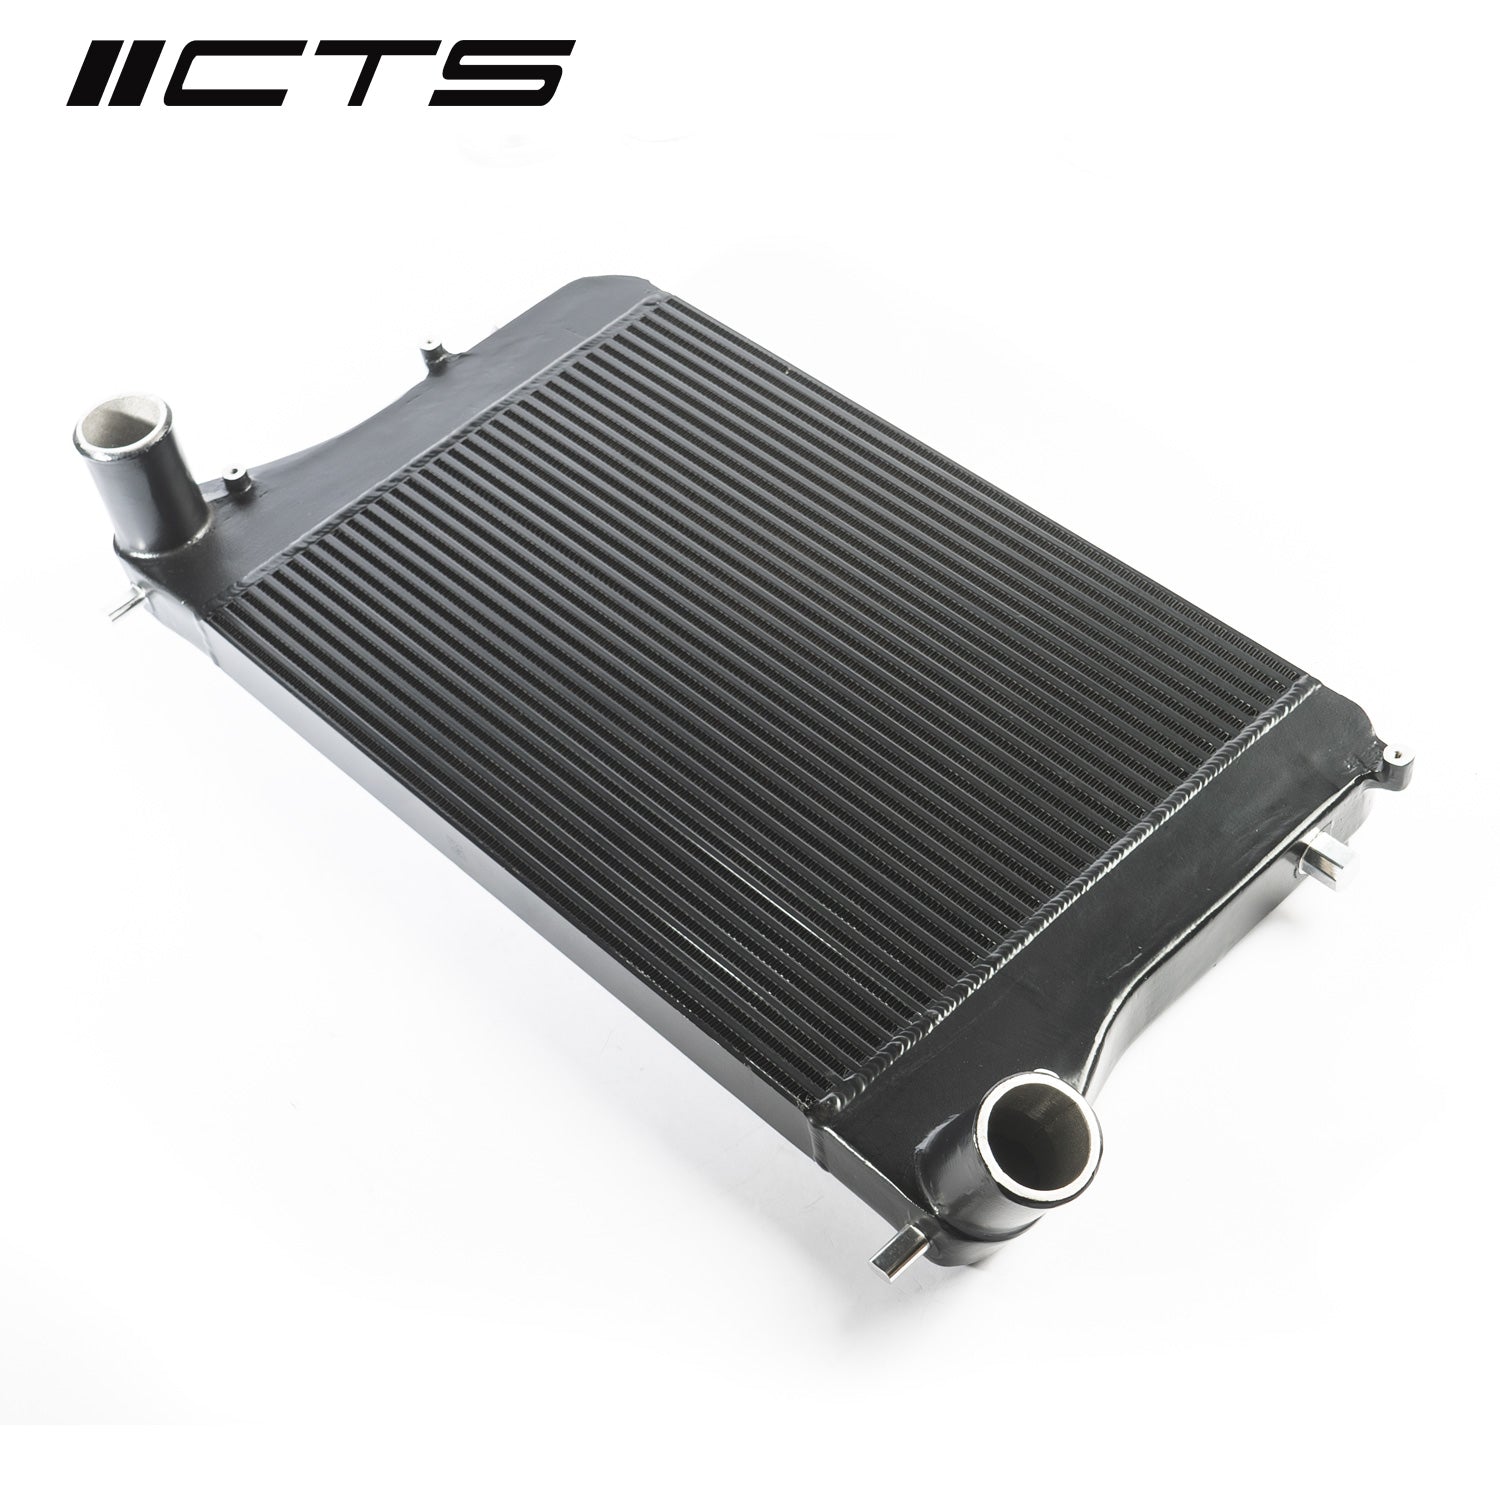 CTS TURBO DIRECT FIT INTERCOOLER KIT FOR EA113 AND EA888 (MK5, MK6 VEHICLES)